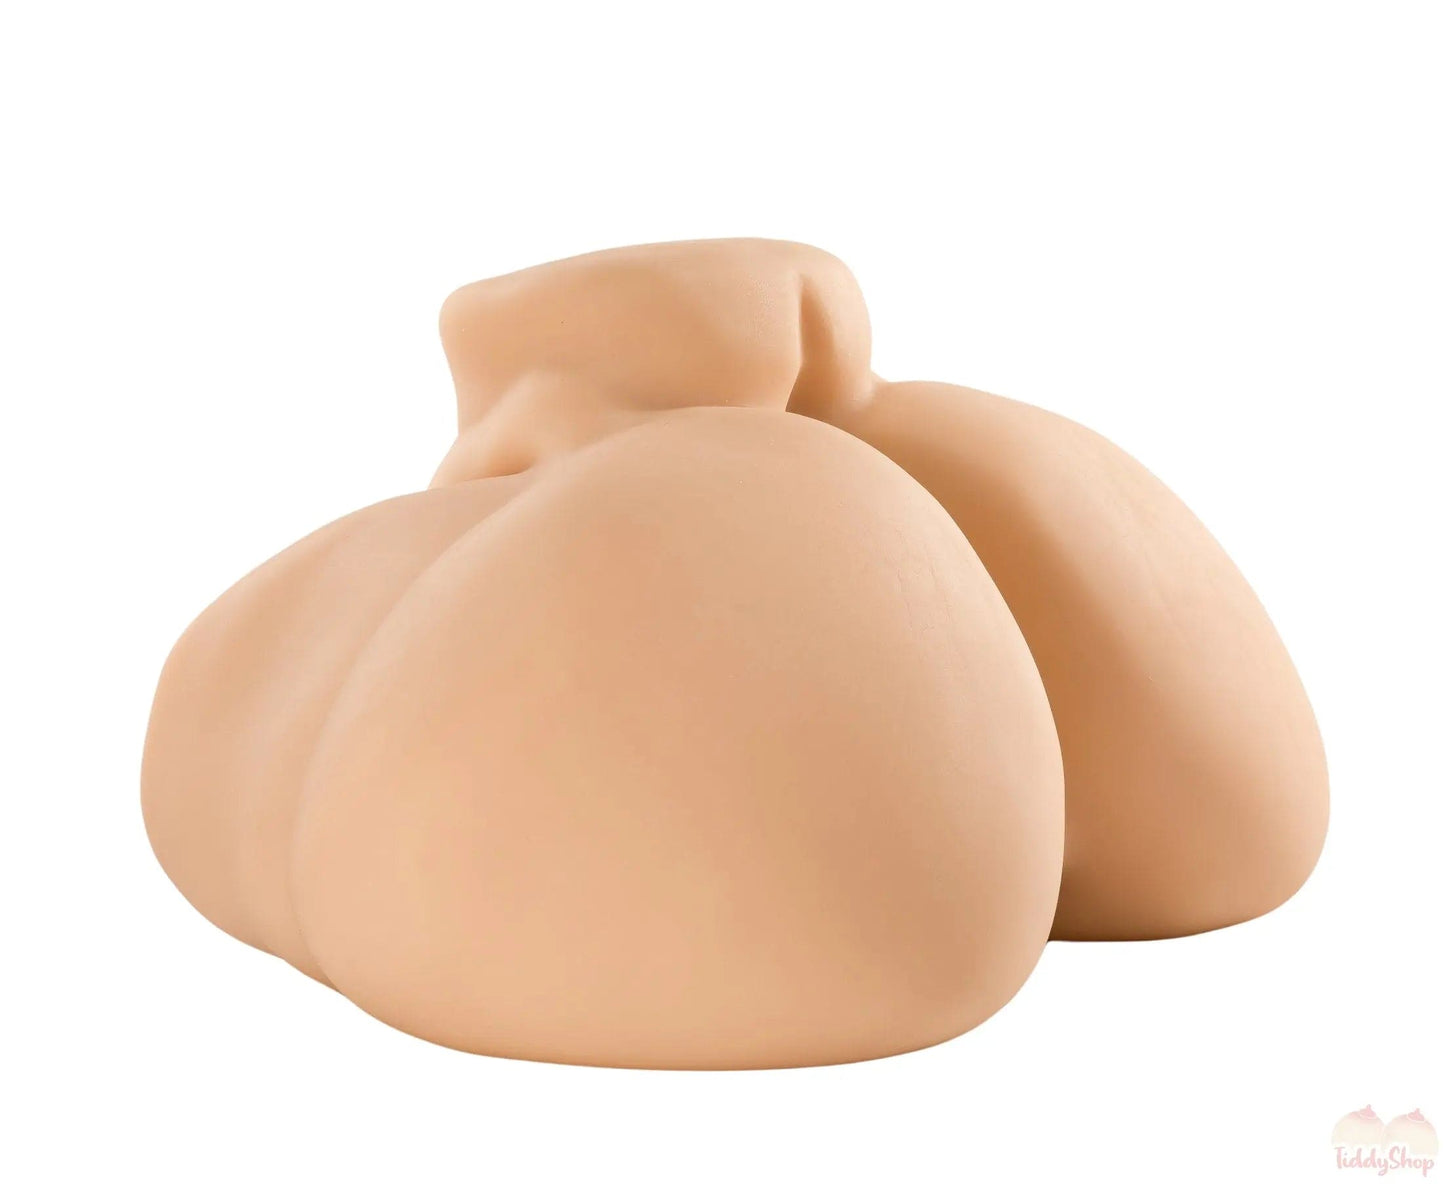 TiddyShop Heavenly Madame Squishable - JelloJiggles BBW Pear Gigantic Ass 94lb (43 kg)  - Extremely Jiggly Huge Booty Giant Butt Hip Toy Onahole - TiddyDollHouse TiddyShop Beige-Fully-Gel-Filled-in-first-video-No-added-col